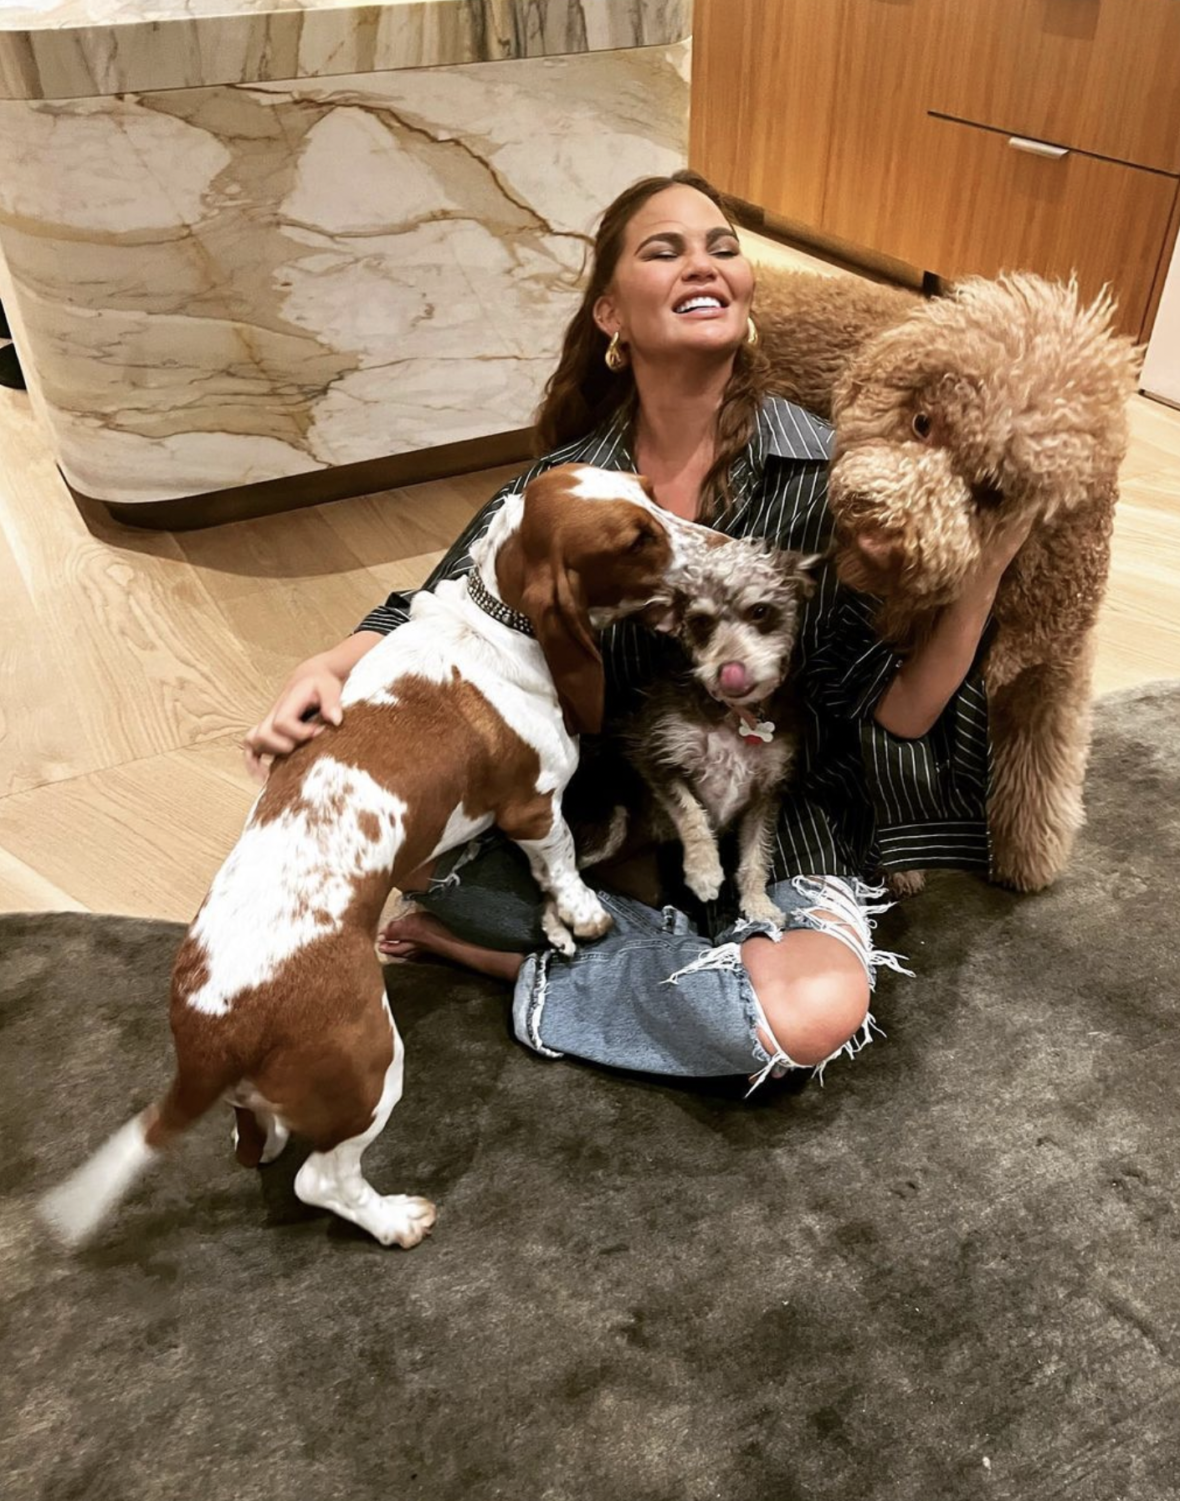 A-List Celebs Are Completely Dog Obsessed! - Chrissy Teigen